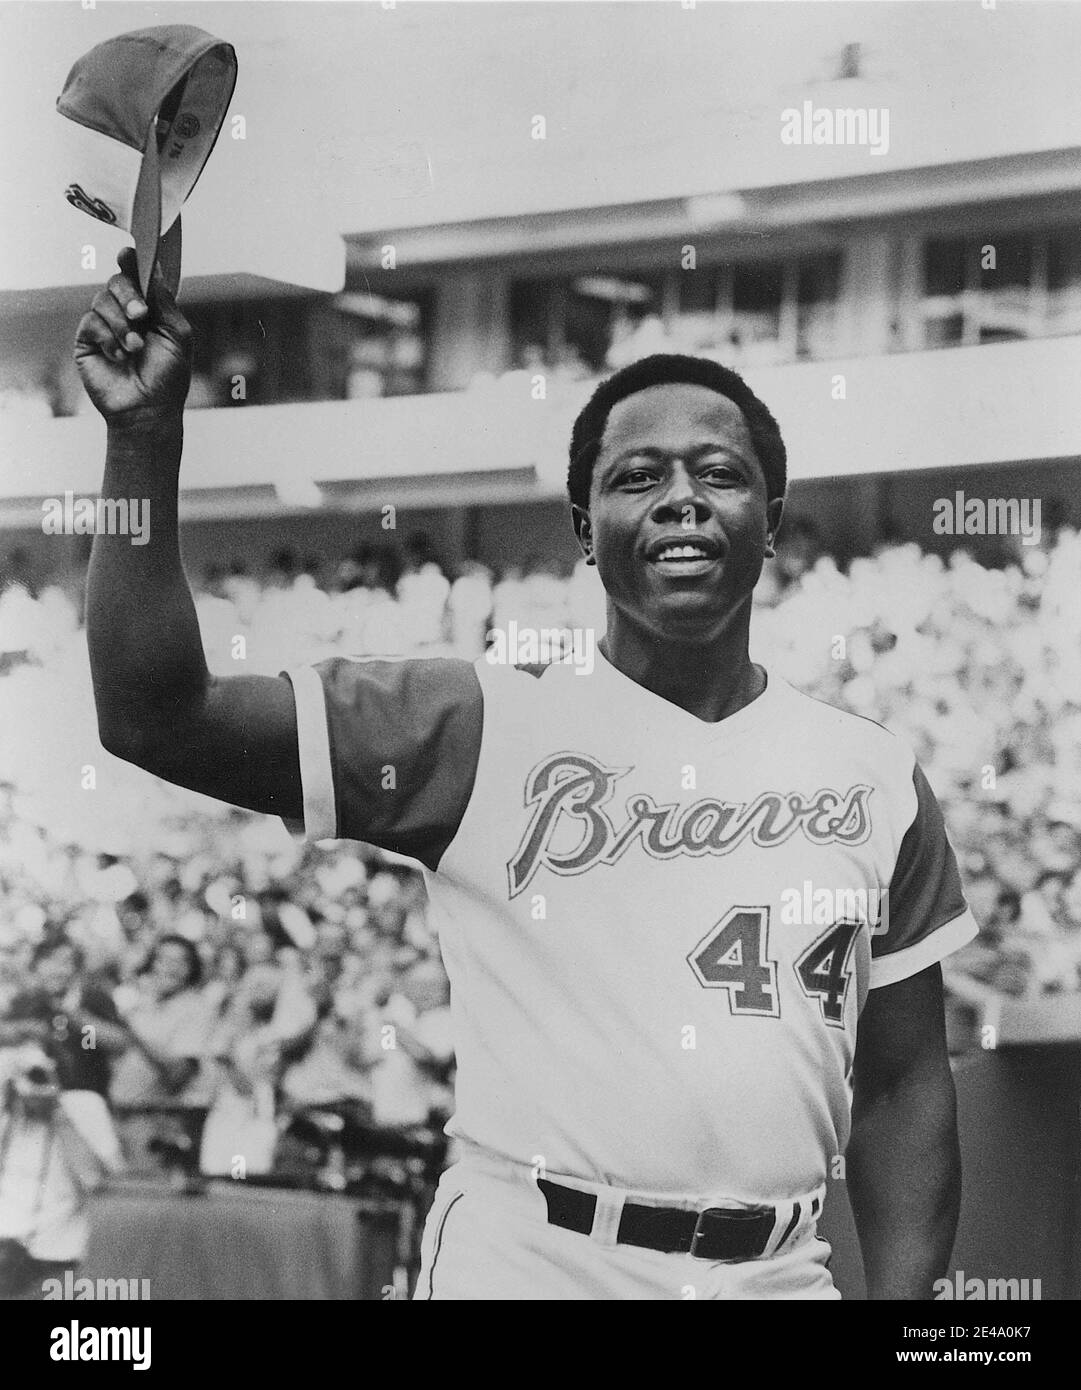 Atlanta, Georgia, USA. 21st Jan, 2021. HANK AARON tips his hat to the crowd  after hitting his 700th home run against the Philadelphia Phillies in  Atlanta. Credit: Globe Photos/ZUMA Wire/Alamy Live News